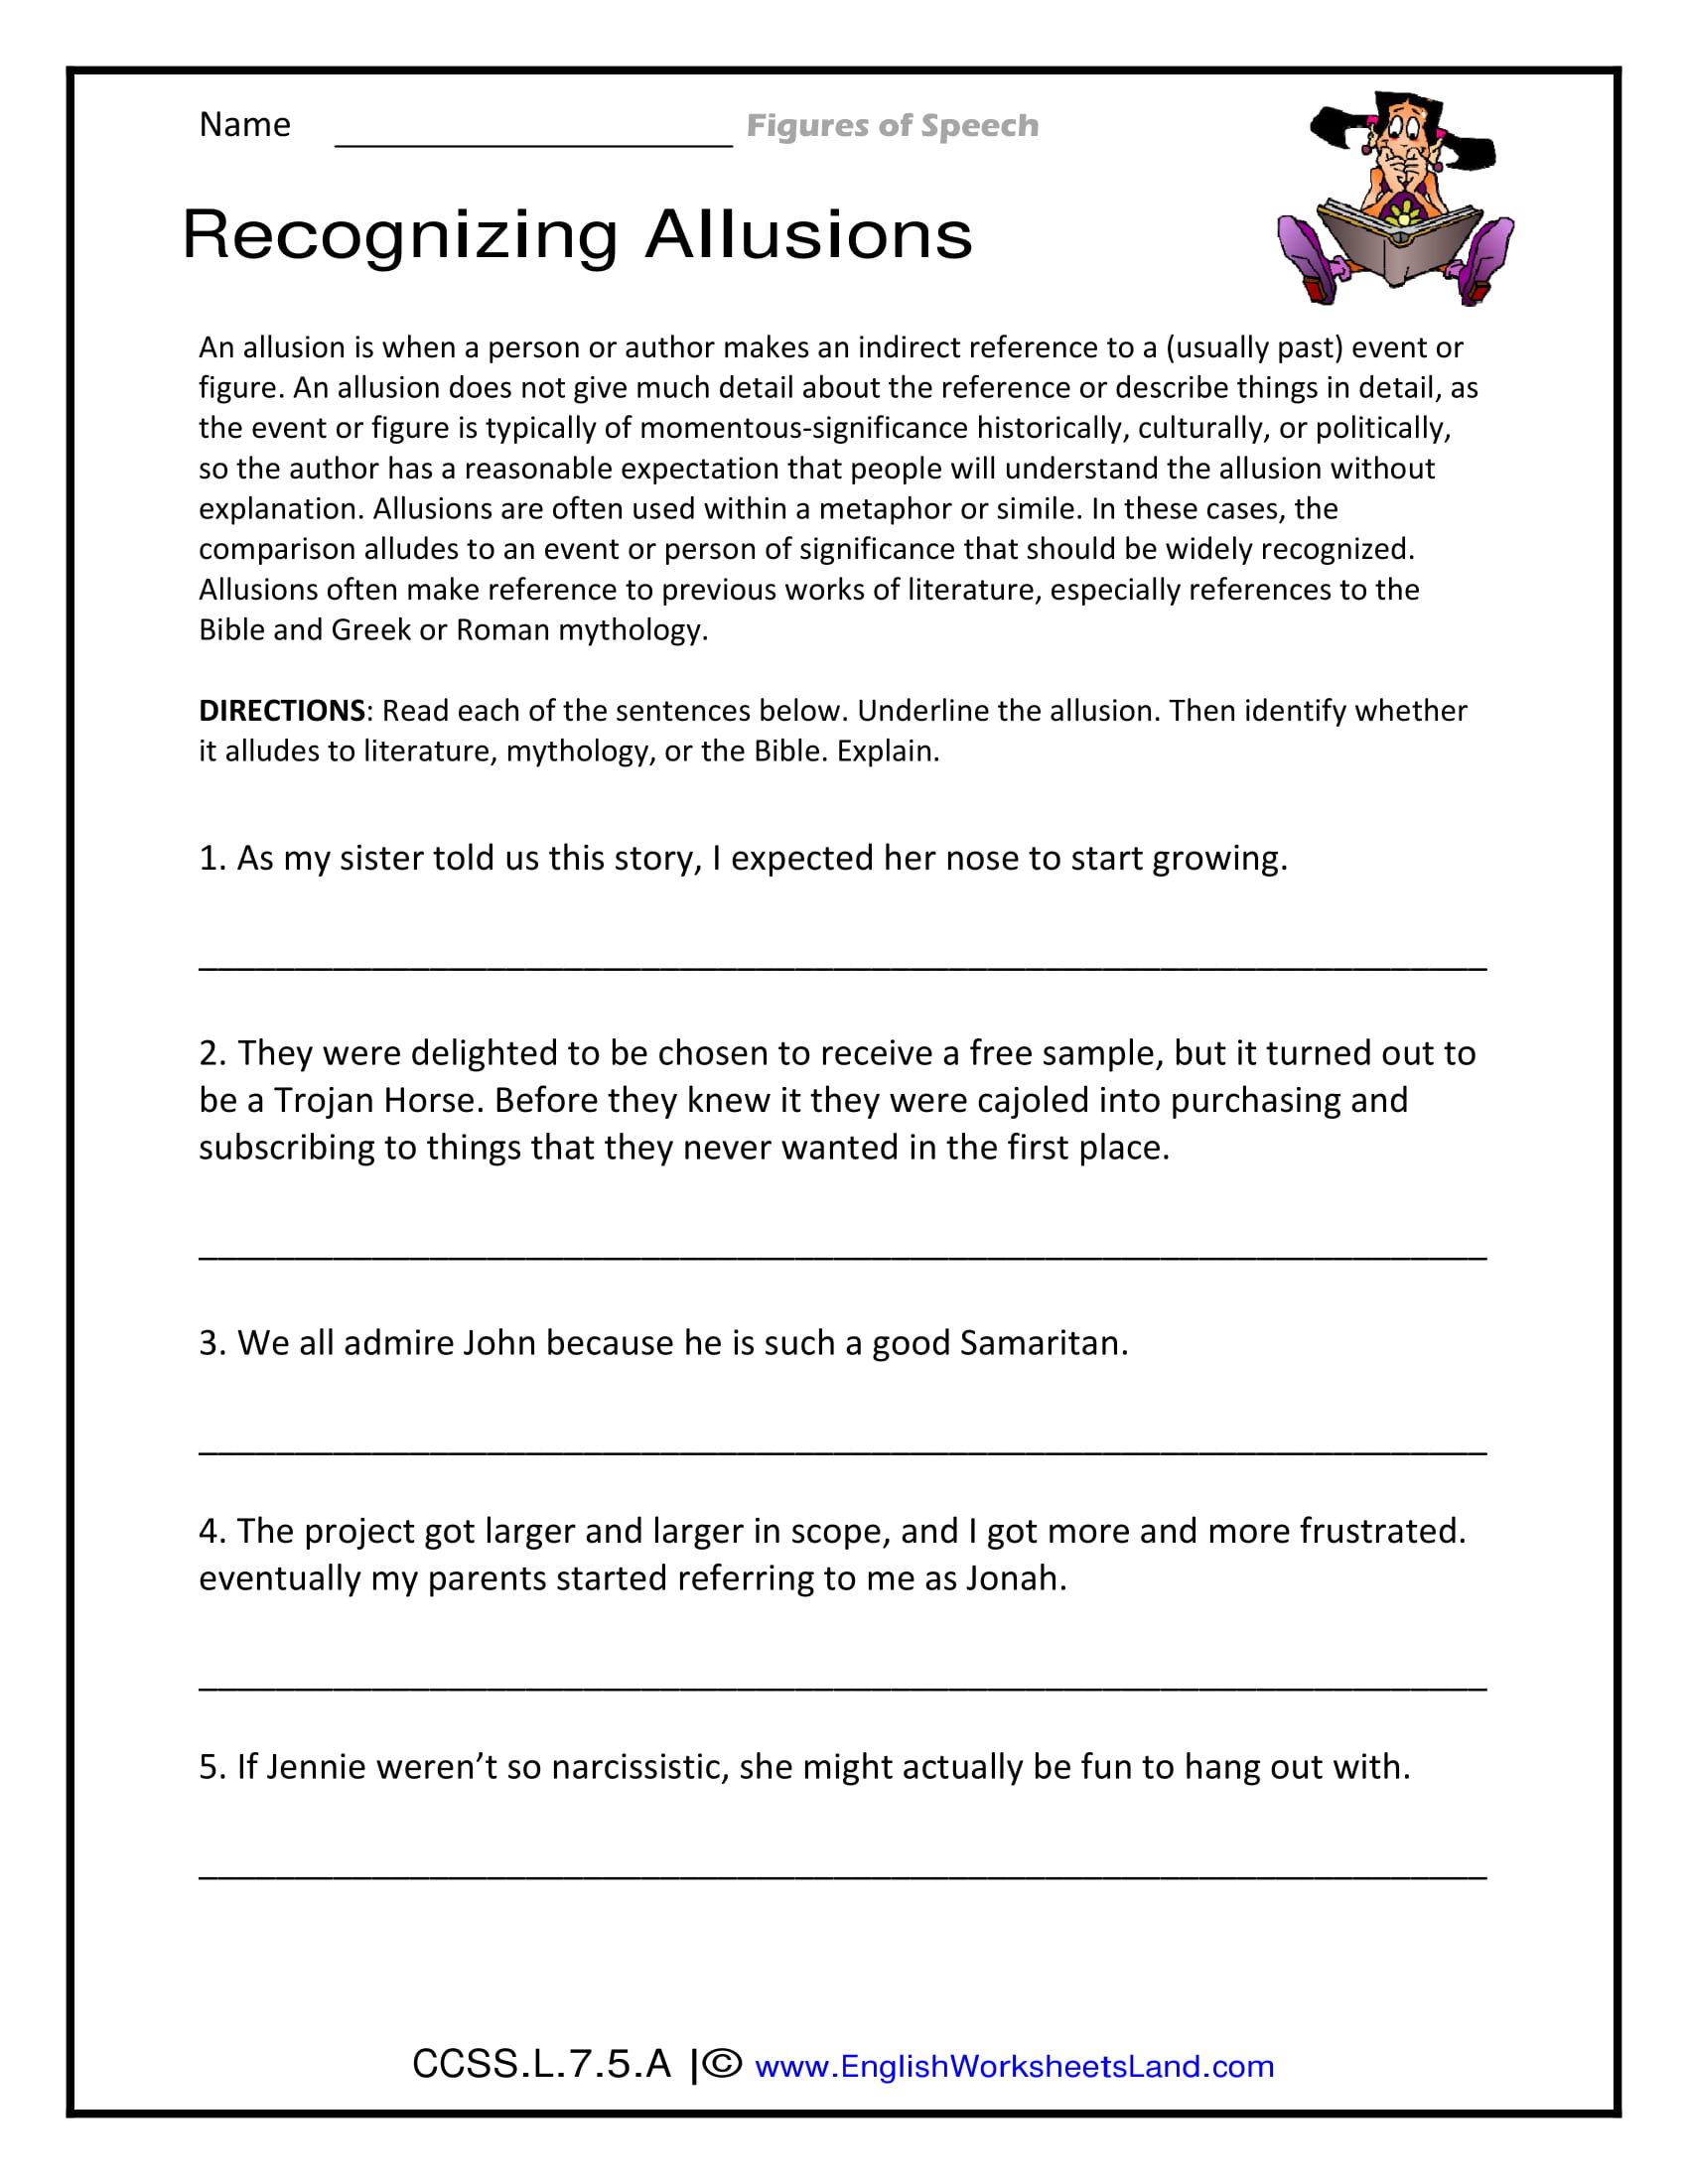 recognizing allusions worksheet example